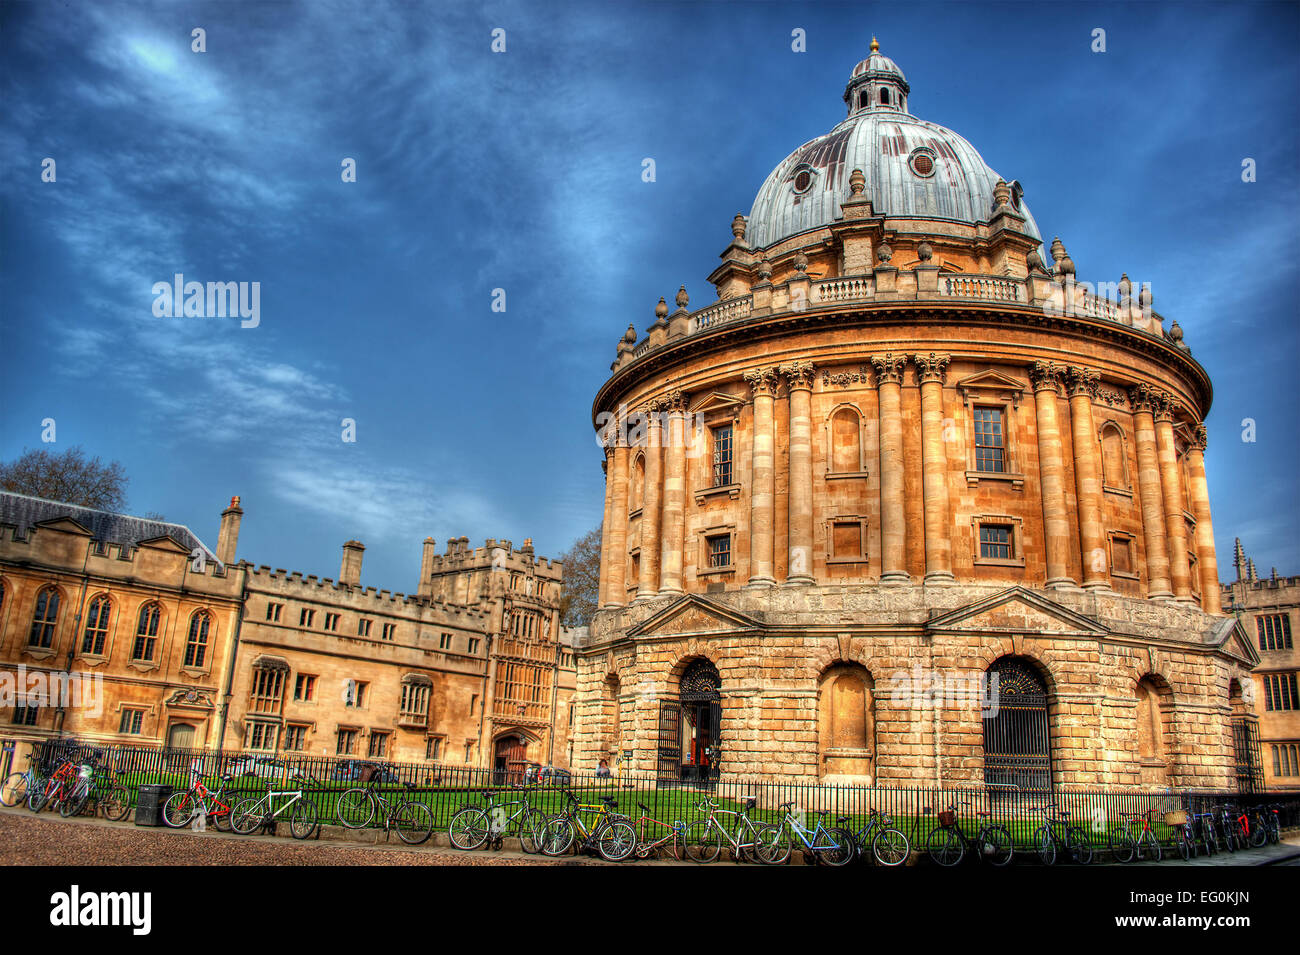 UK, England, Oxford, Low angle view of Radcliffe Camera Stock Photo